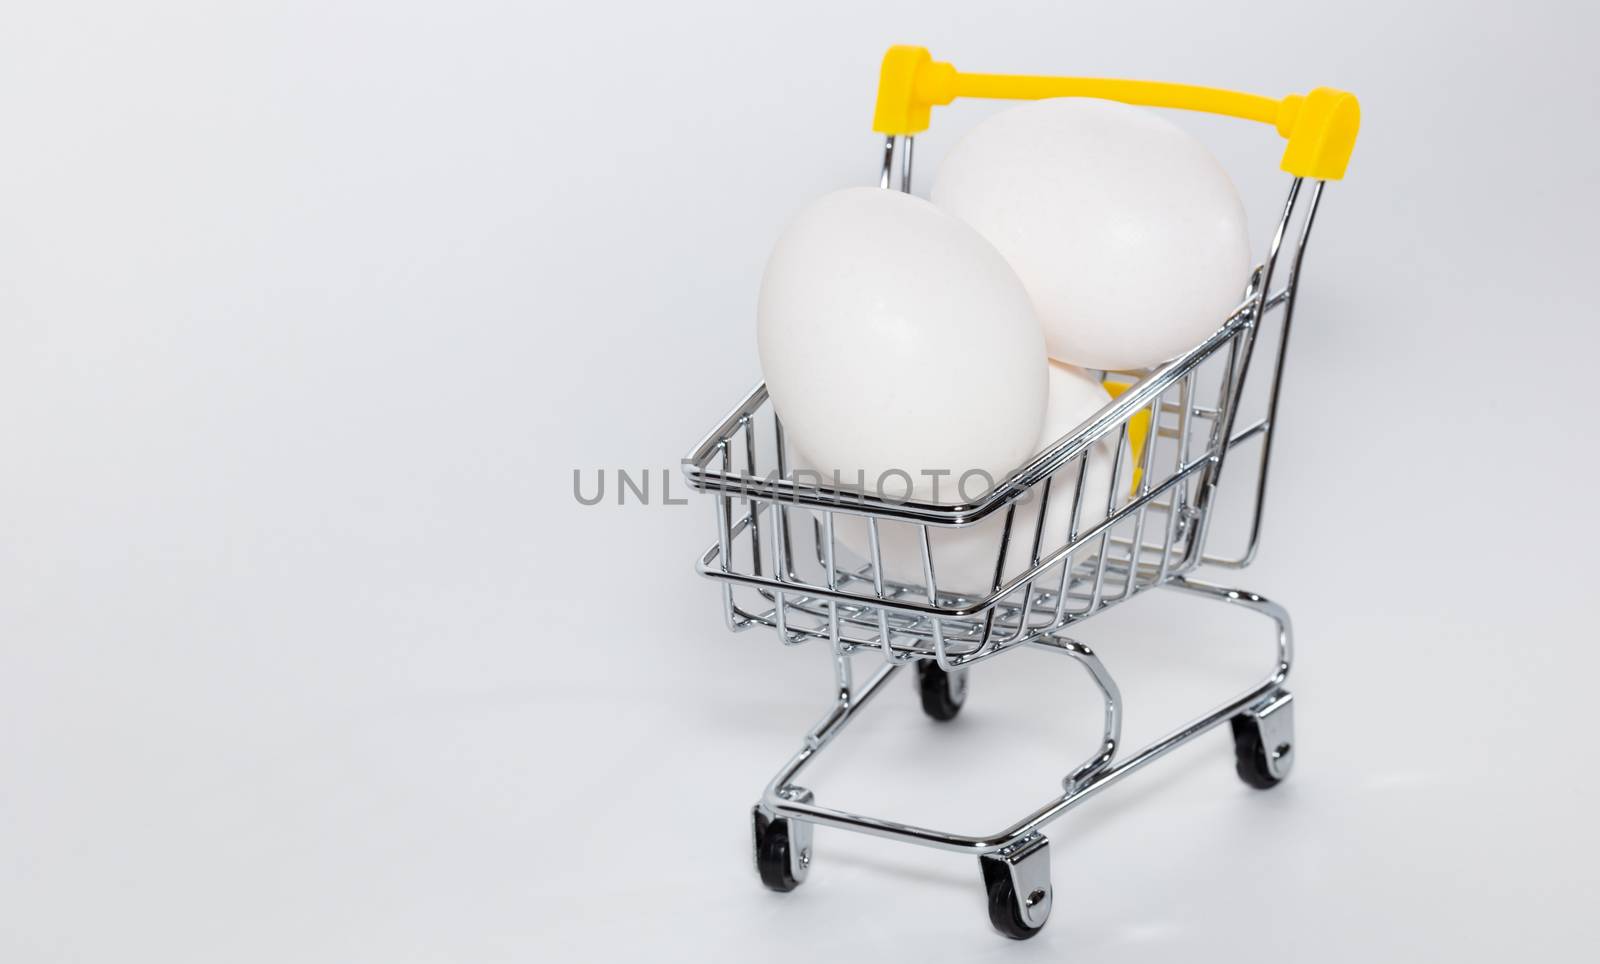 Fresh eggs in a shopping cart. Shopping, purchasing, and food delivery concept. Copy space. by DamantisZ